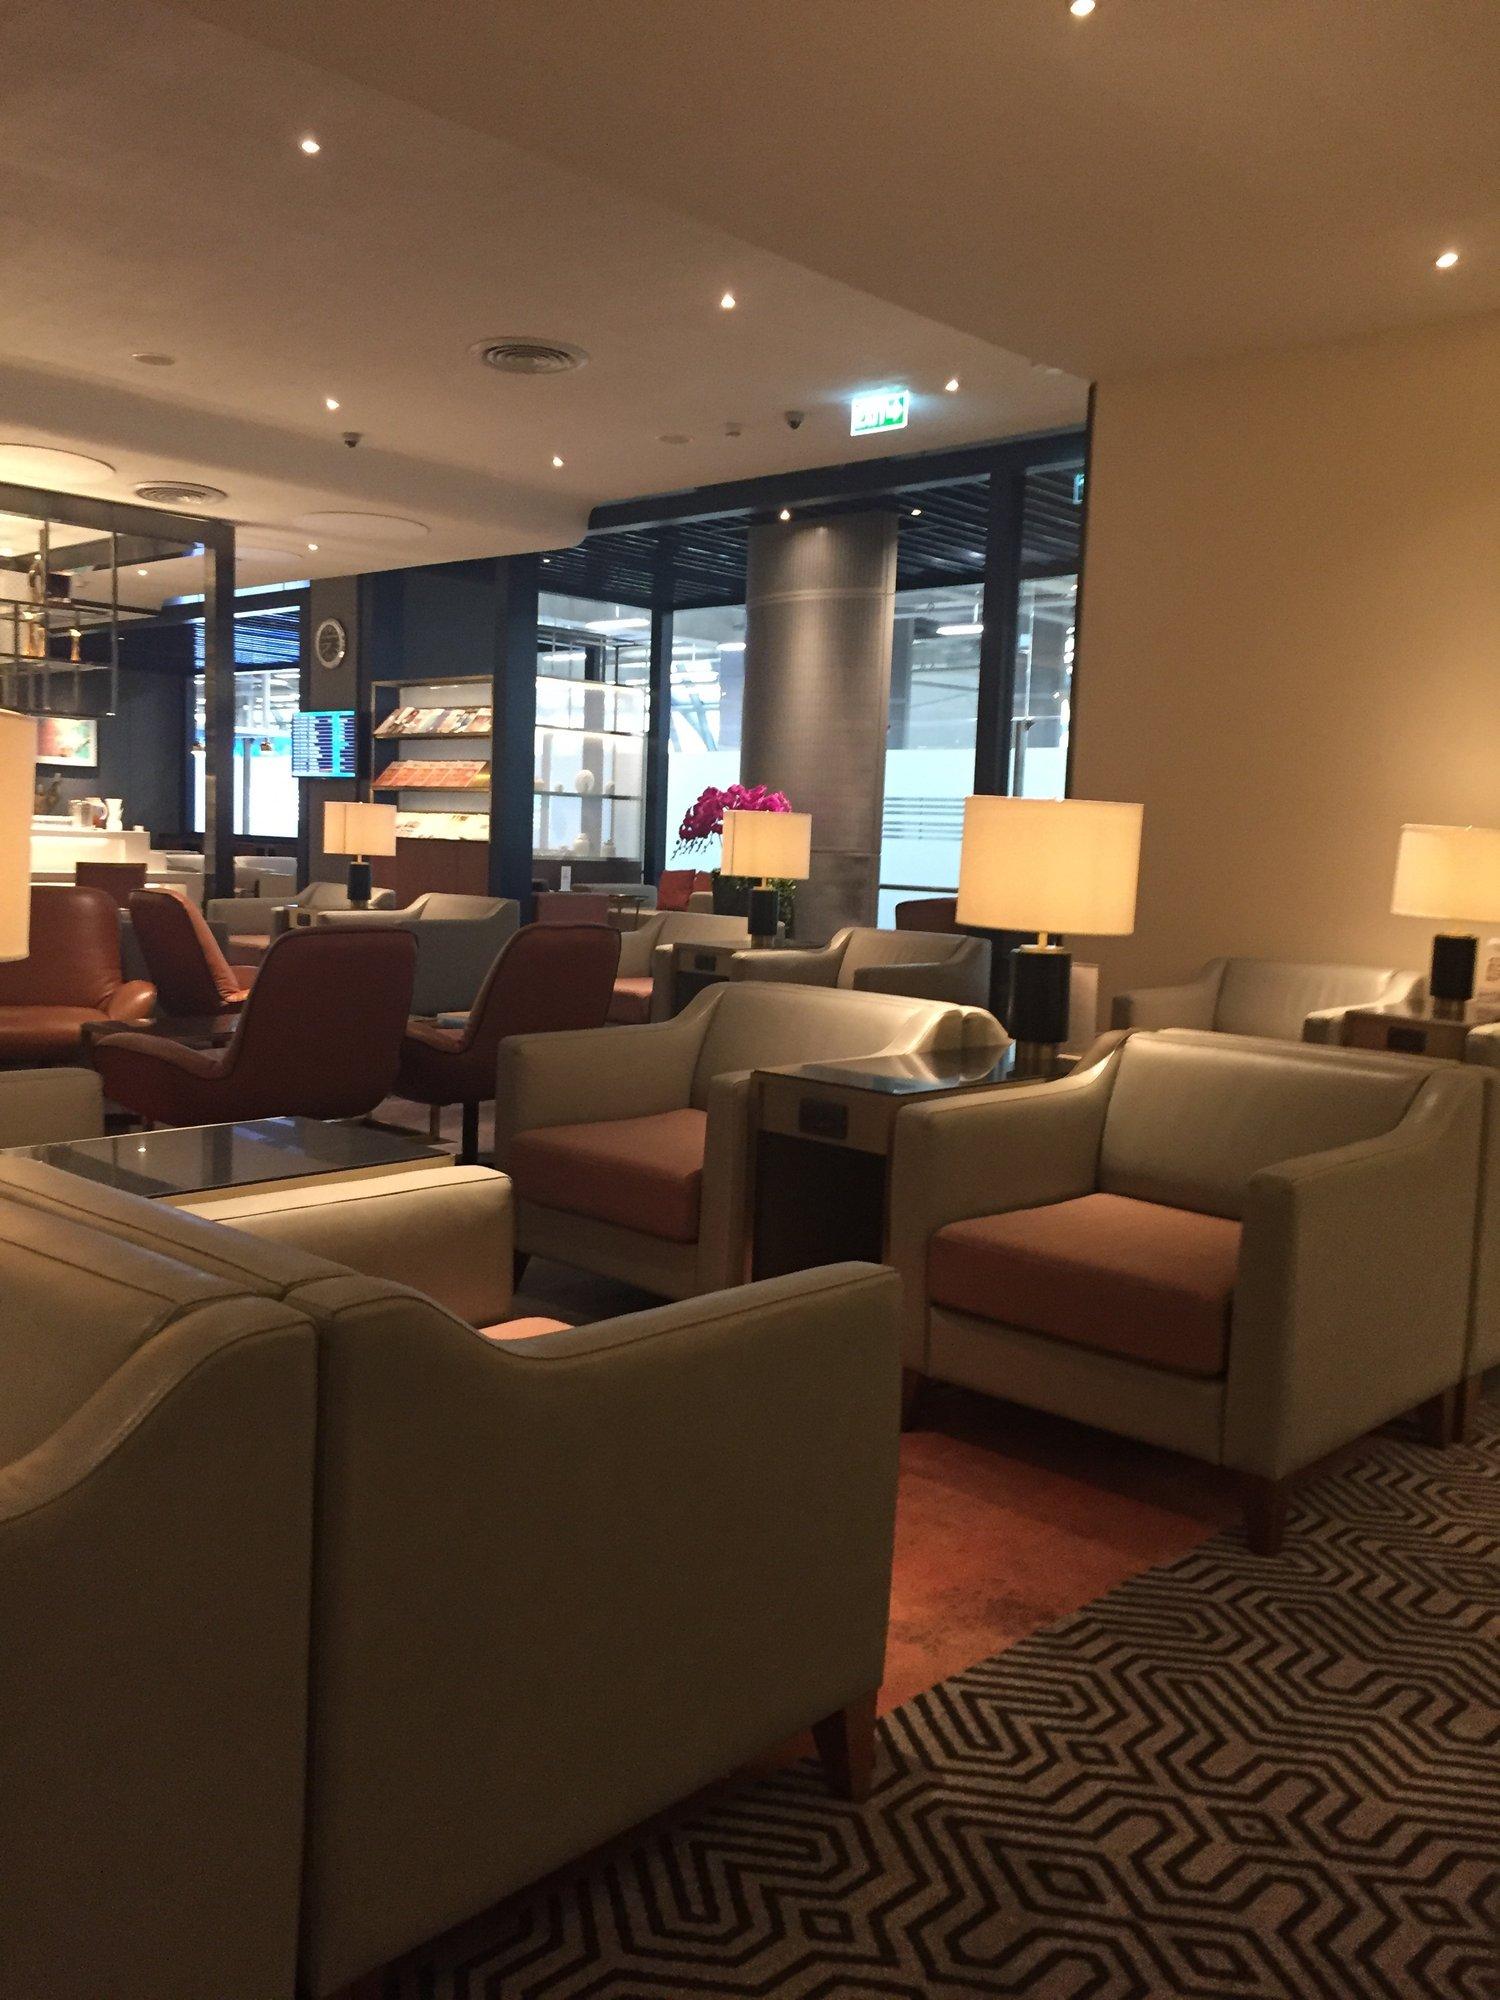 Singapore Airlines SilverKris Business Class Lounge image 2 of 16